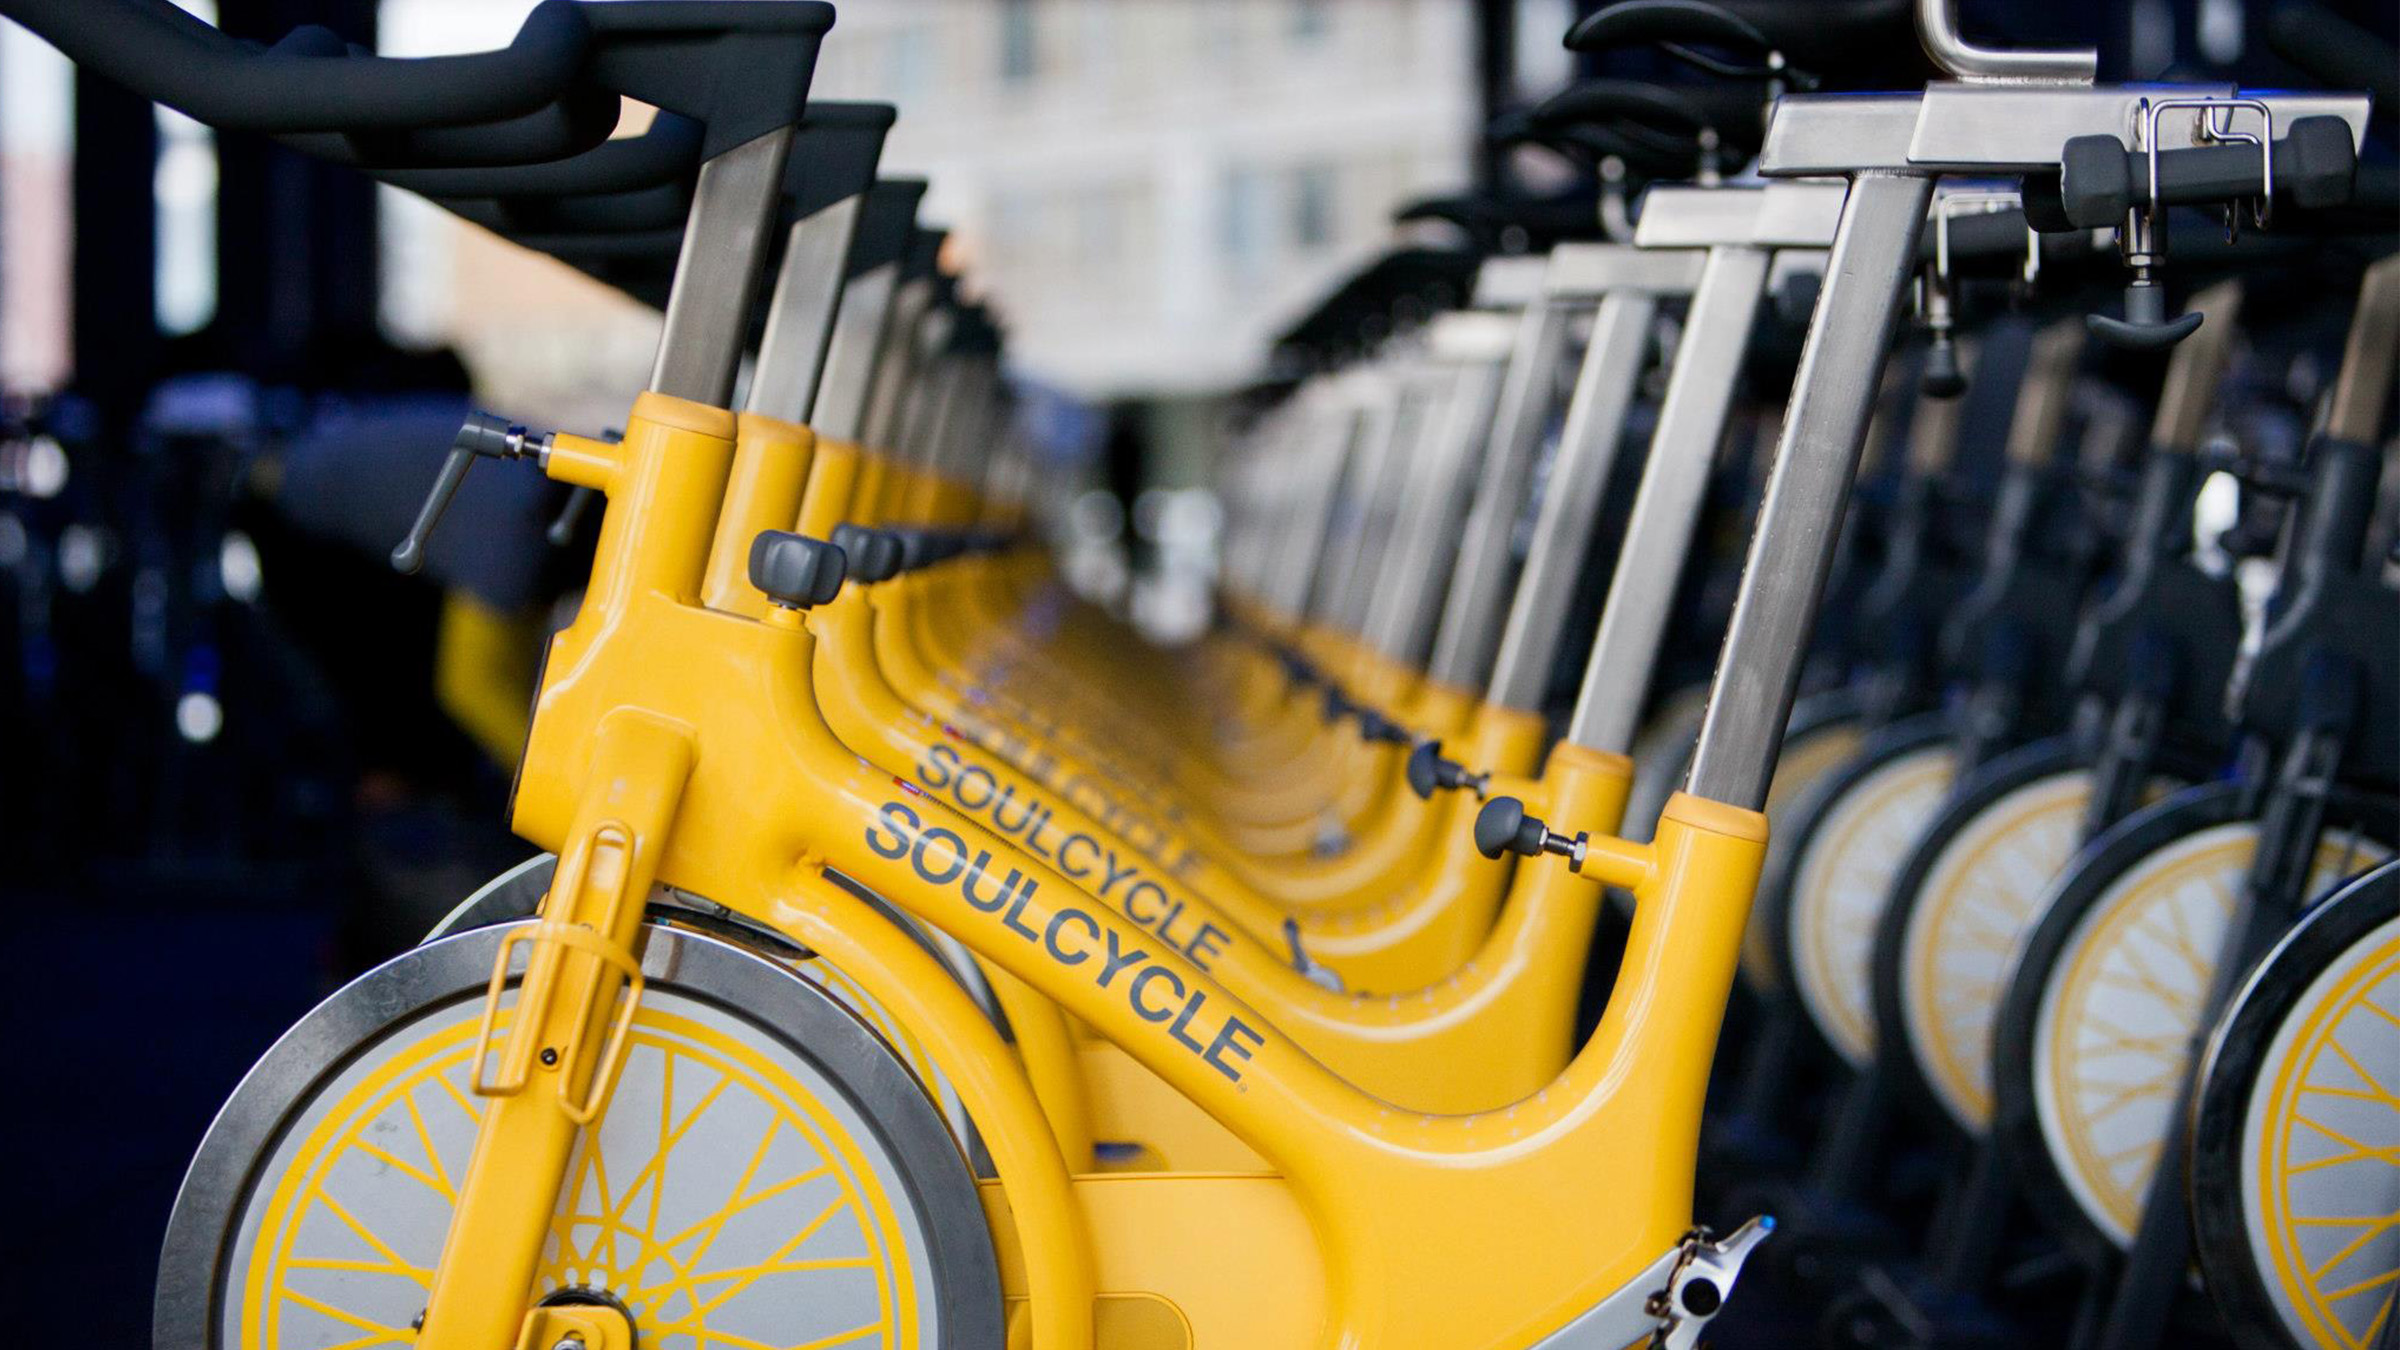 soulcycle spd clips